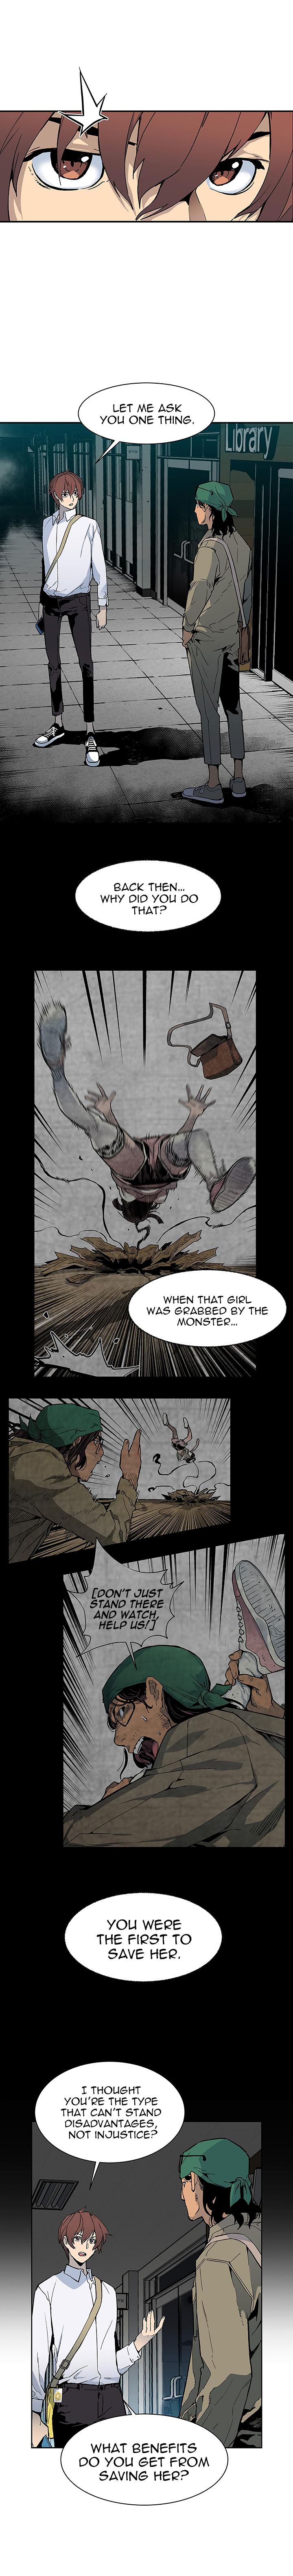 The Second Coming Of Gluttony Chapter 12 Page 11